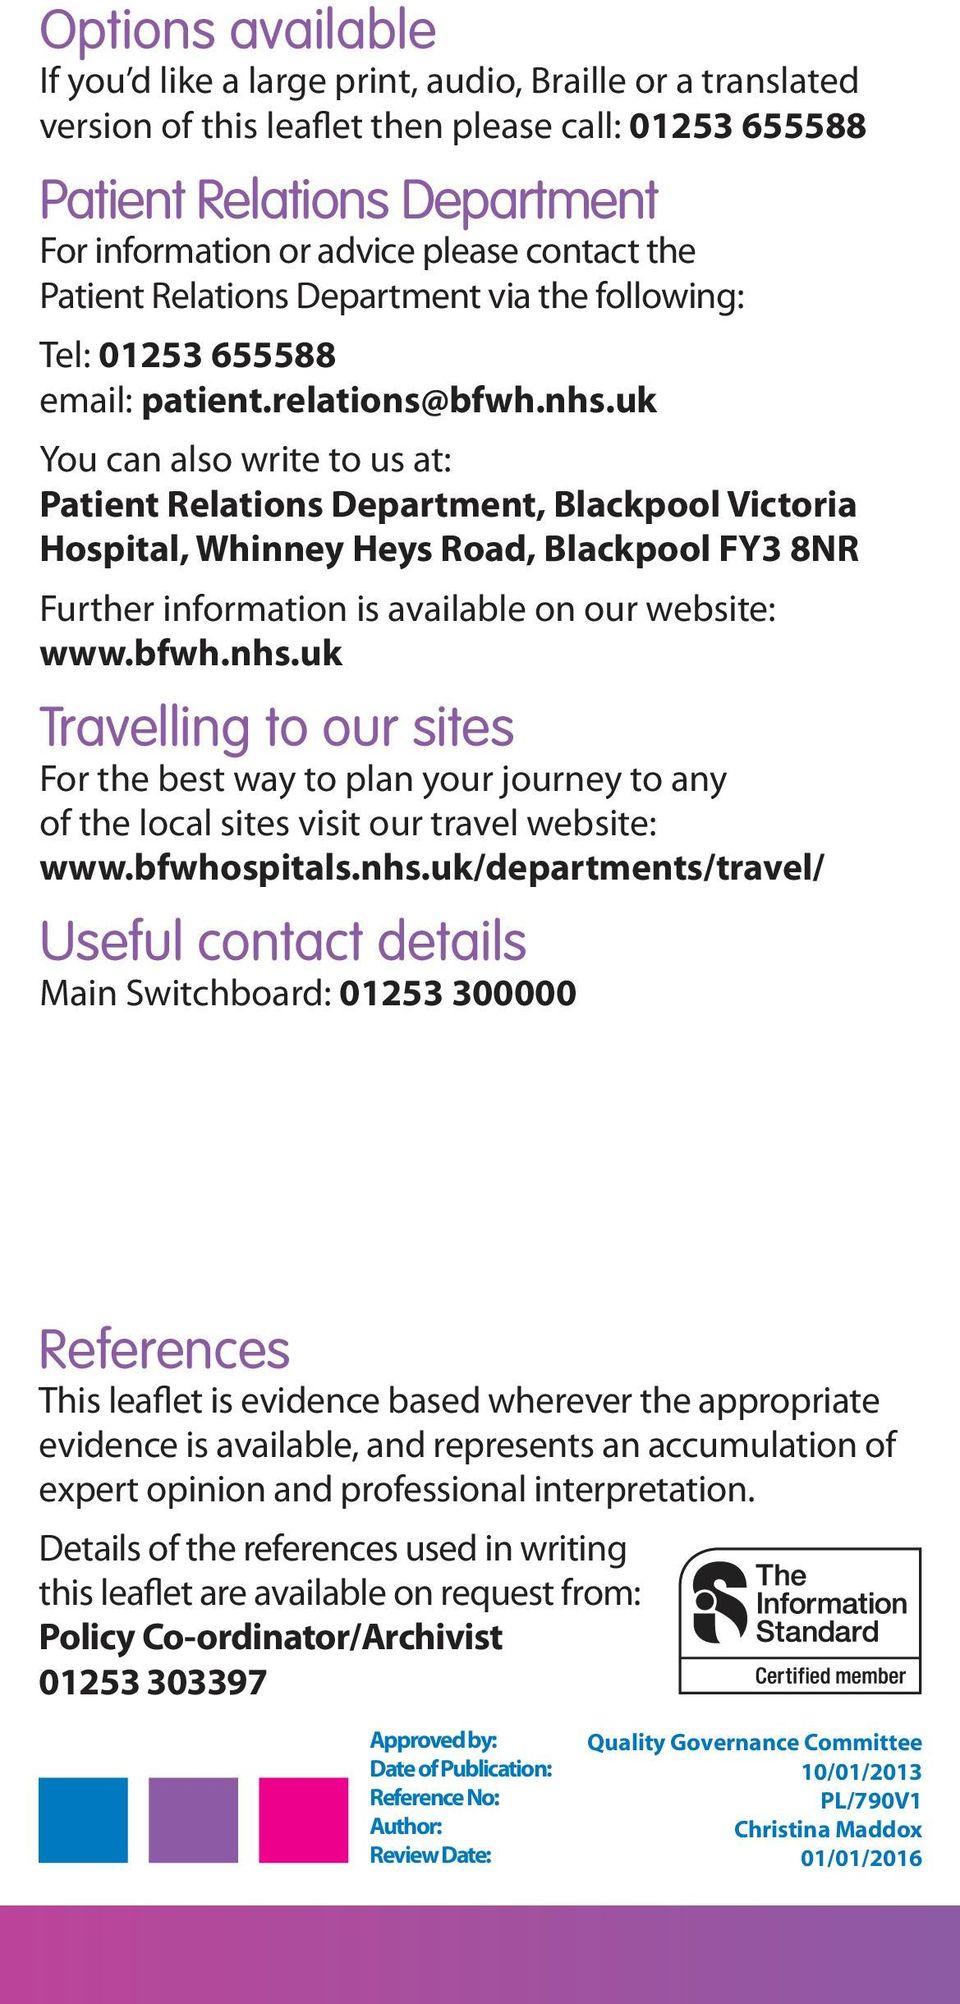 uk You can also write to us at: Patient Relations Department, Blackpool Victoria Hospital, Whinney Heys Road, Blackpool FY3 8NR Further information is available on our website: www.bfwh.nhs.